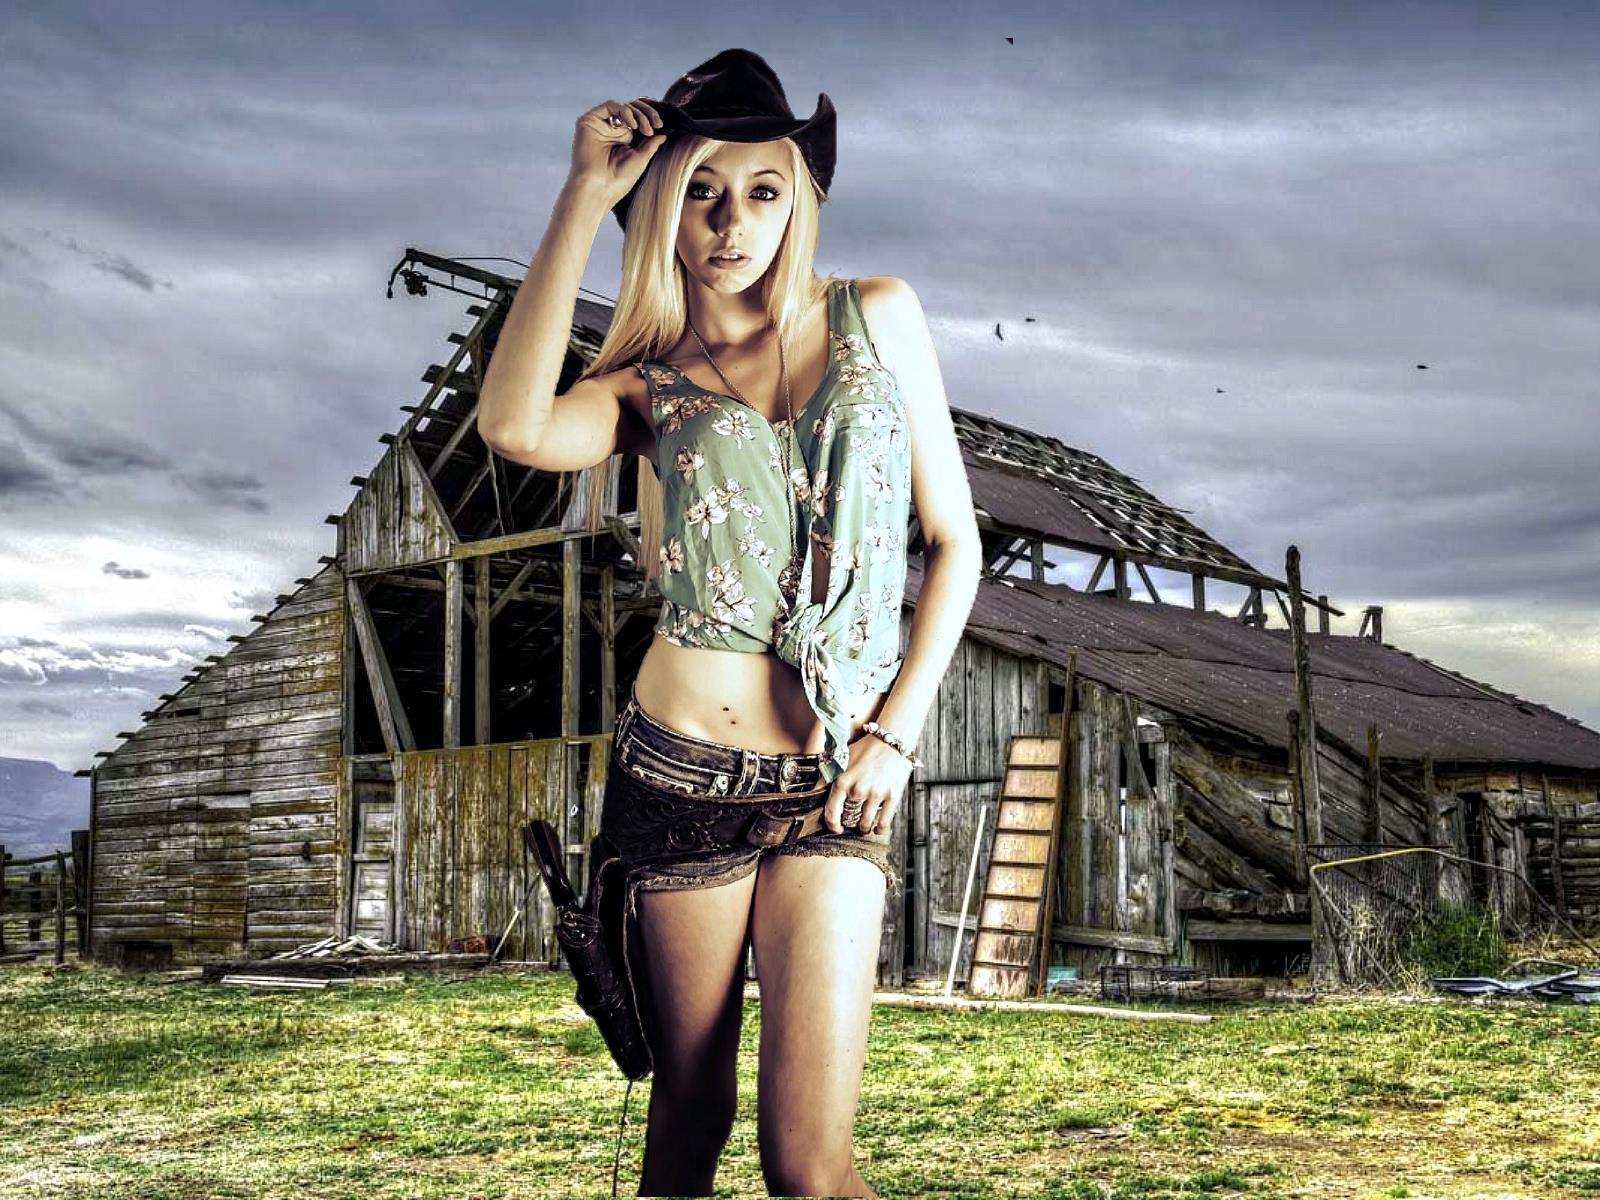 New Cowgirl Image Kdl74 HD Quality Wallpaper